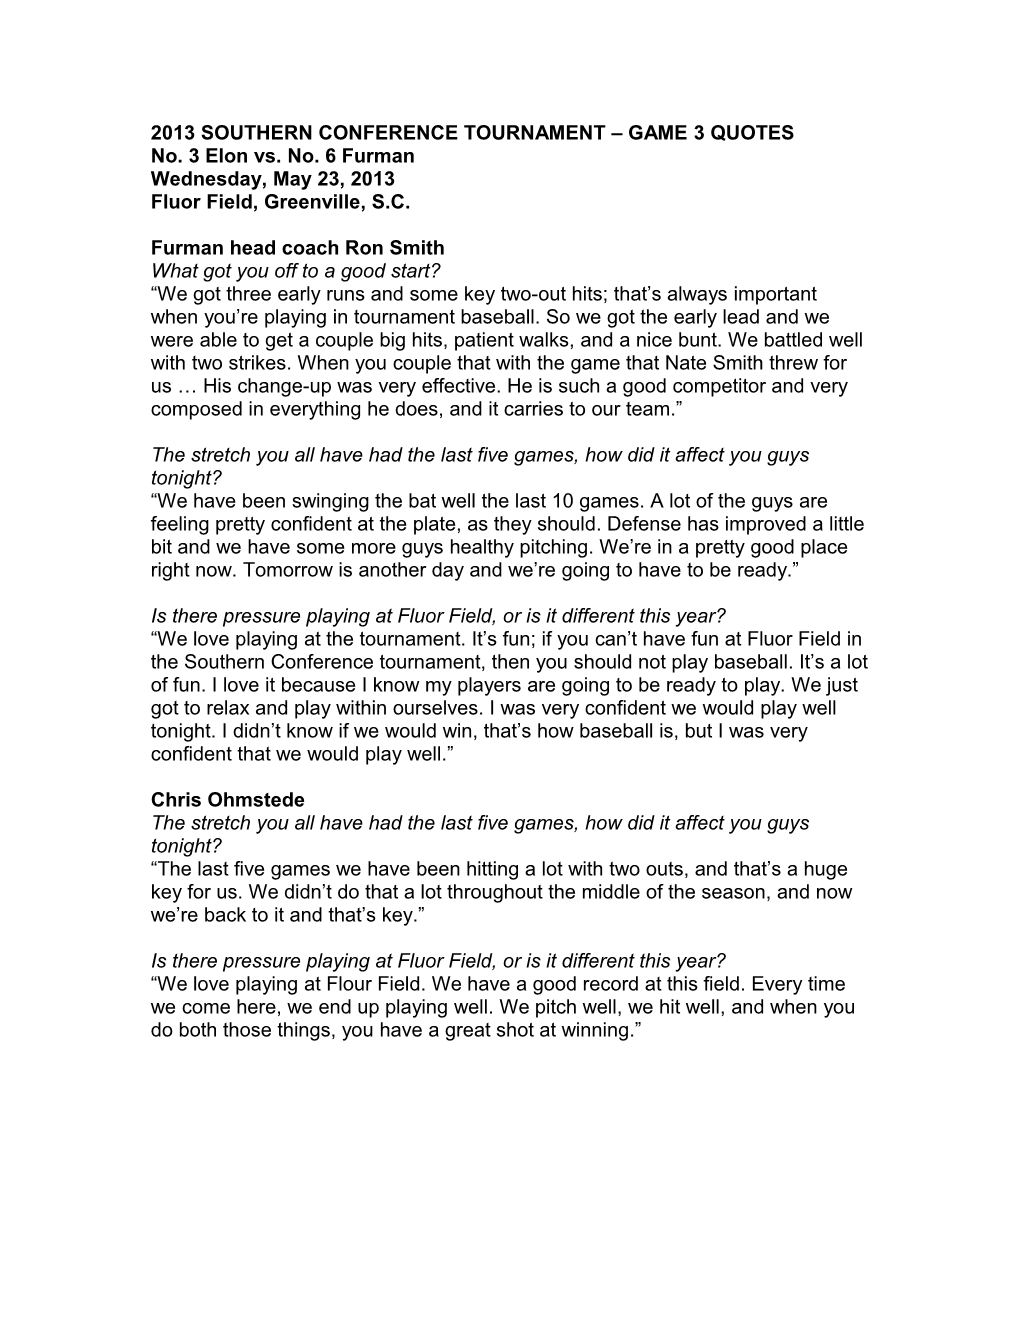 2013 Southern Conference Tournament Game 3 Quotes